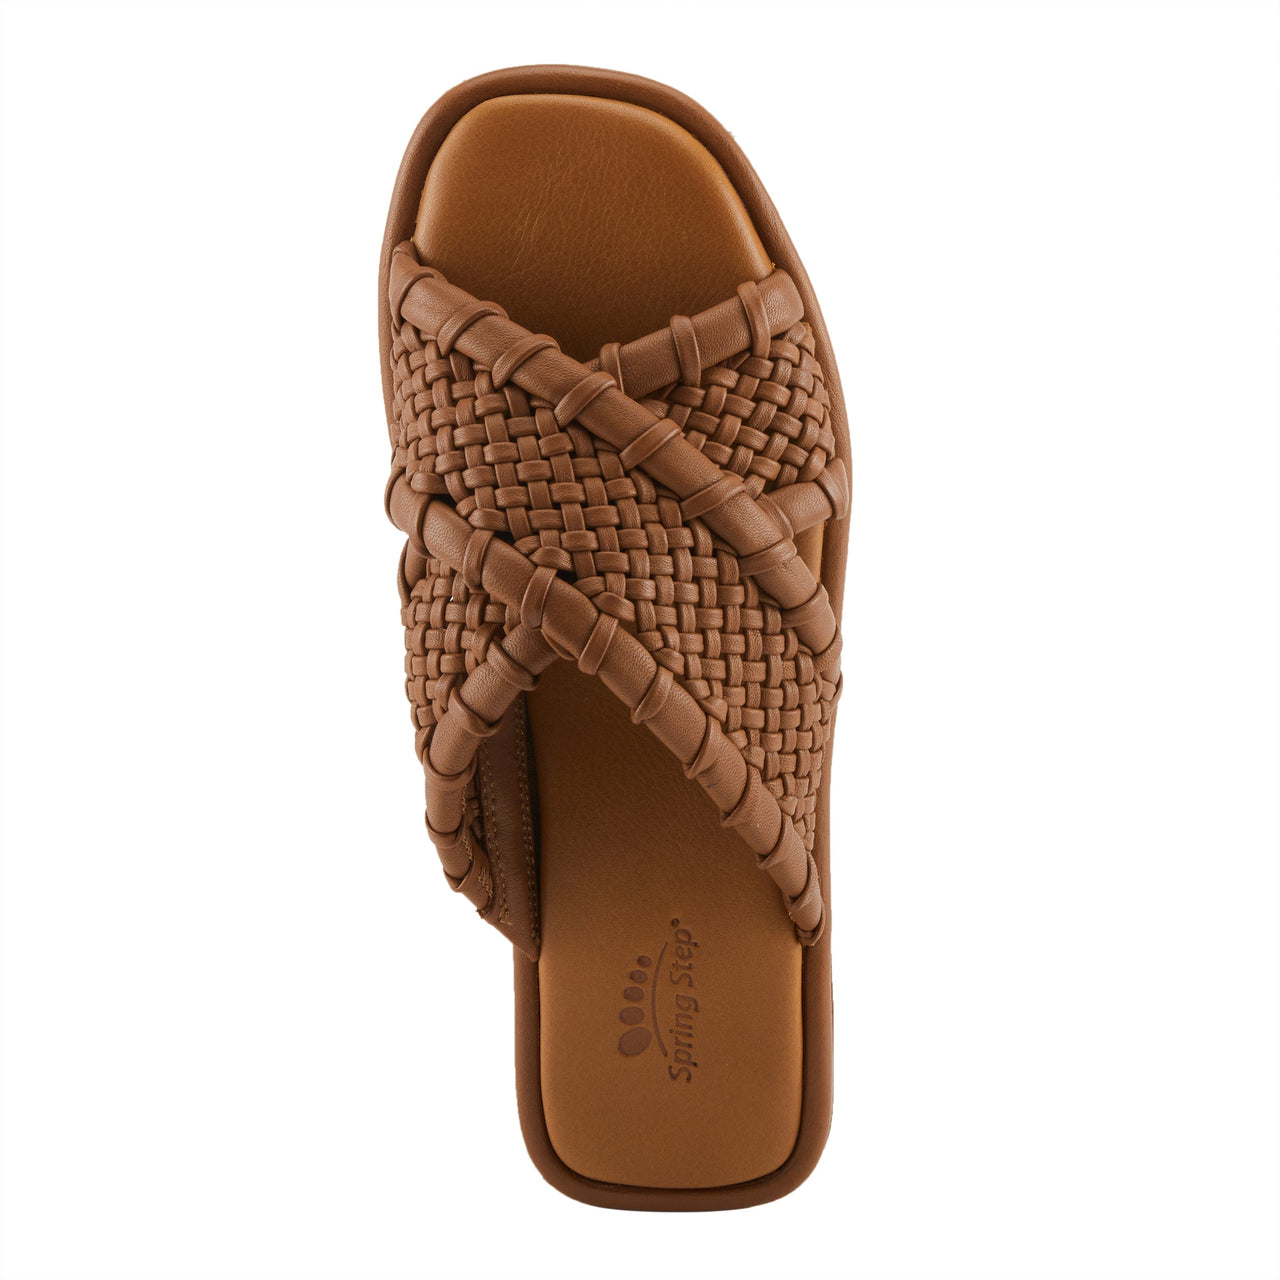 A close-up image of the Spring Step Montauk Sandals, featuring a stylish design with comfortable straps and a cushioned sole for all-day wear